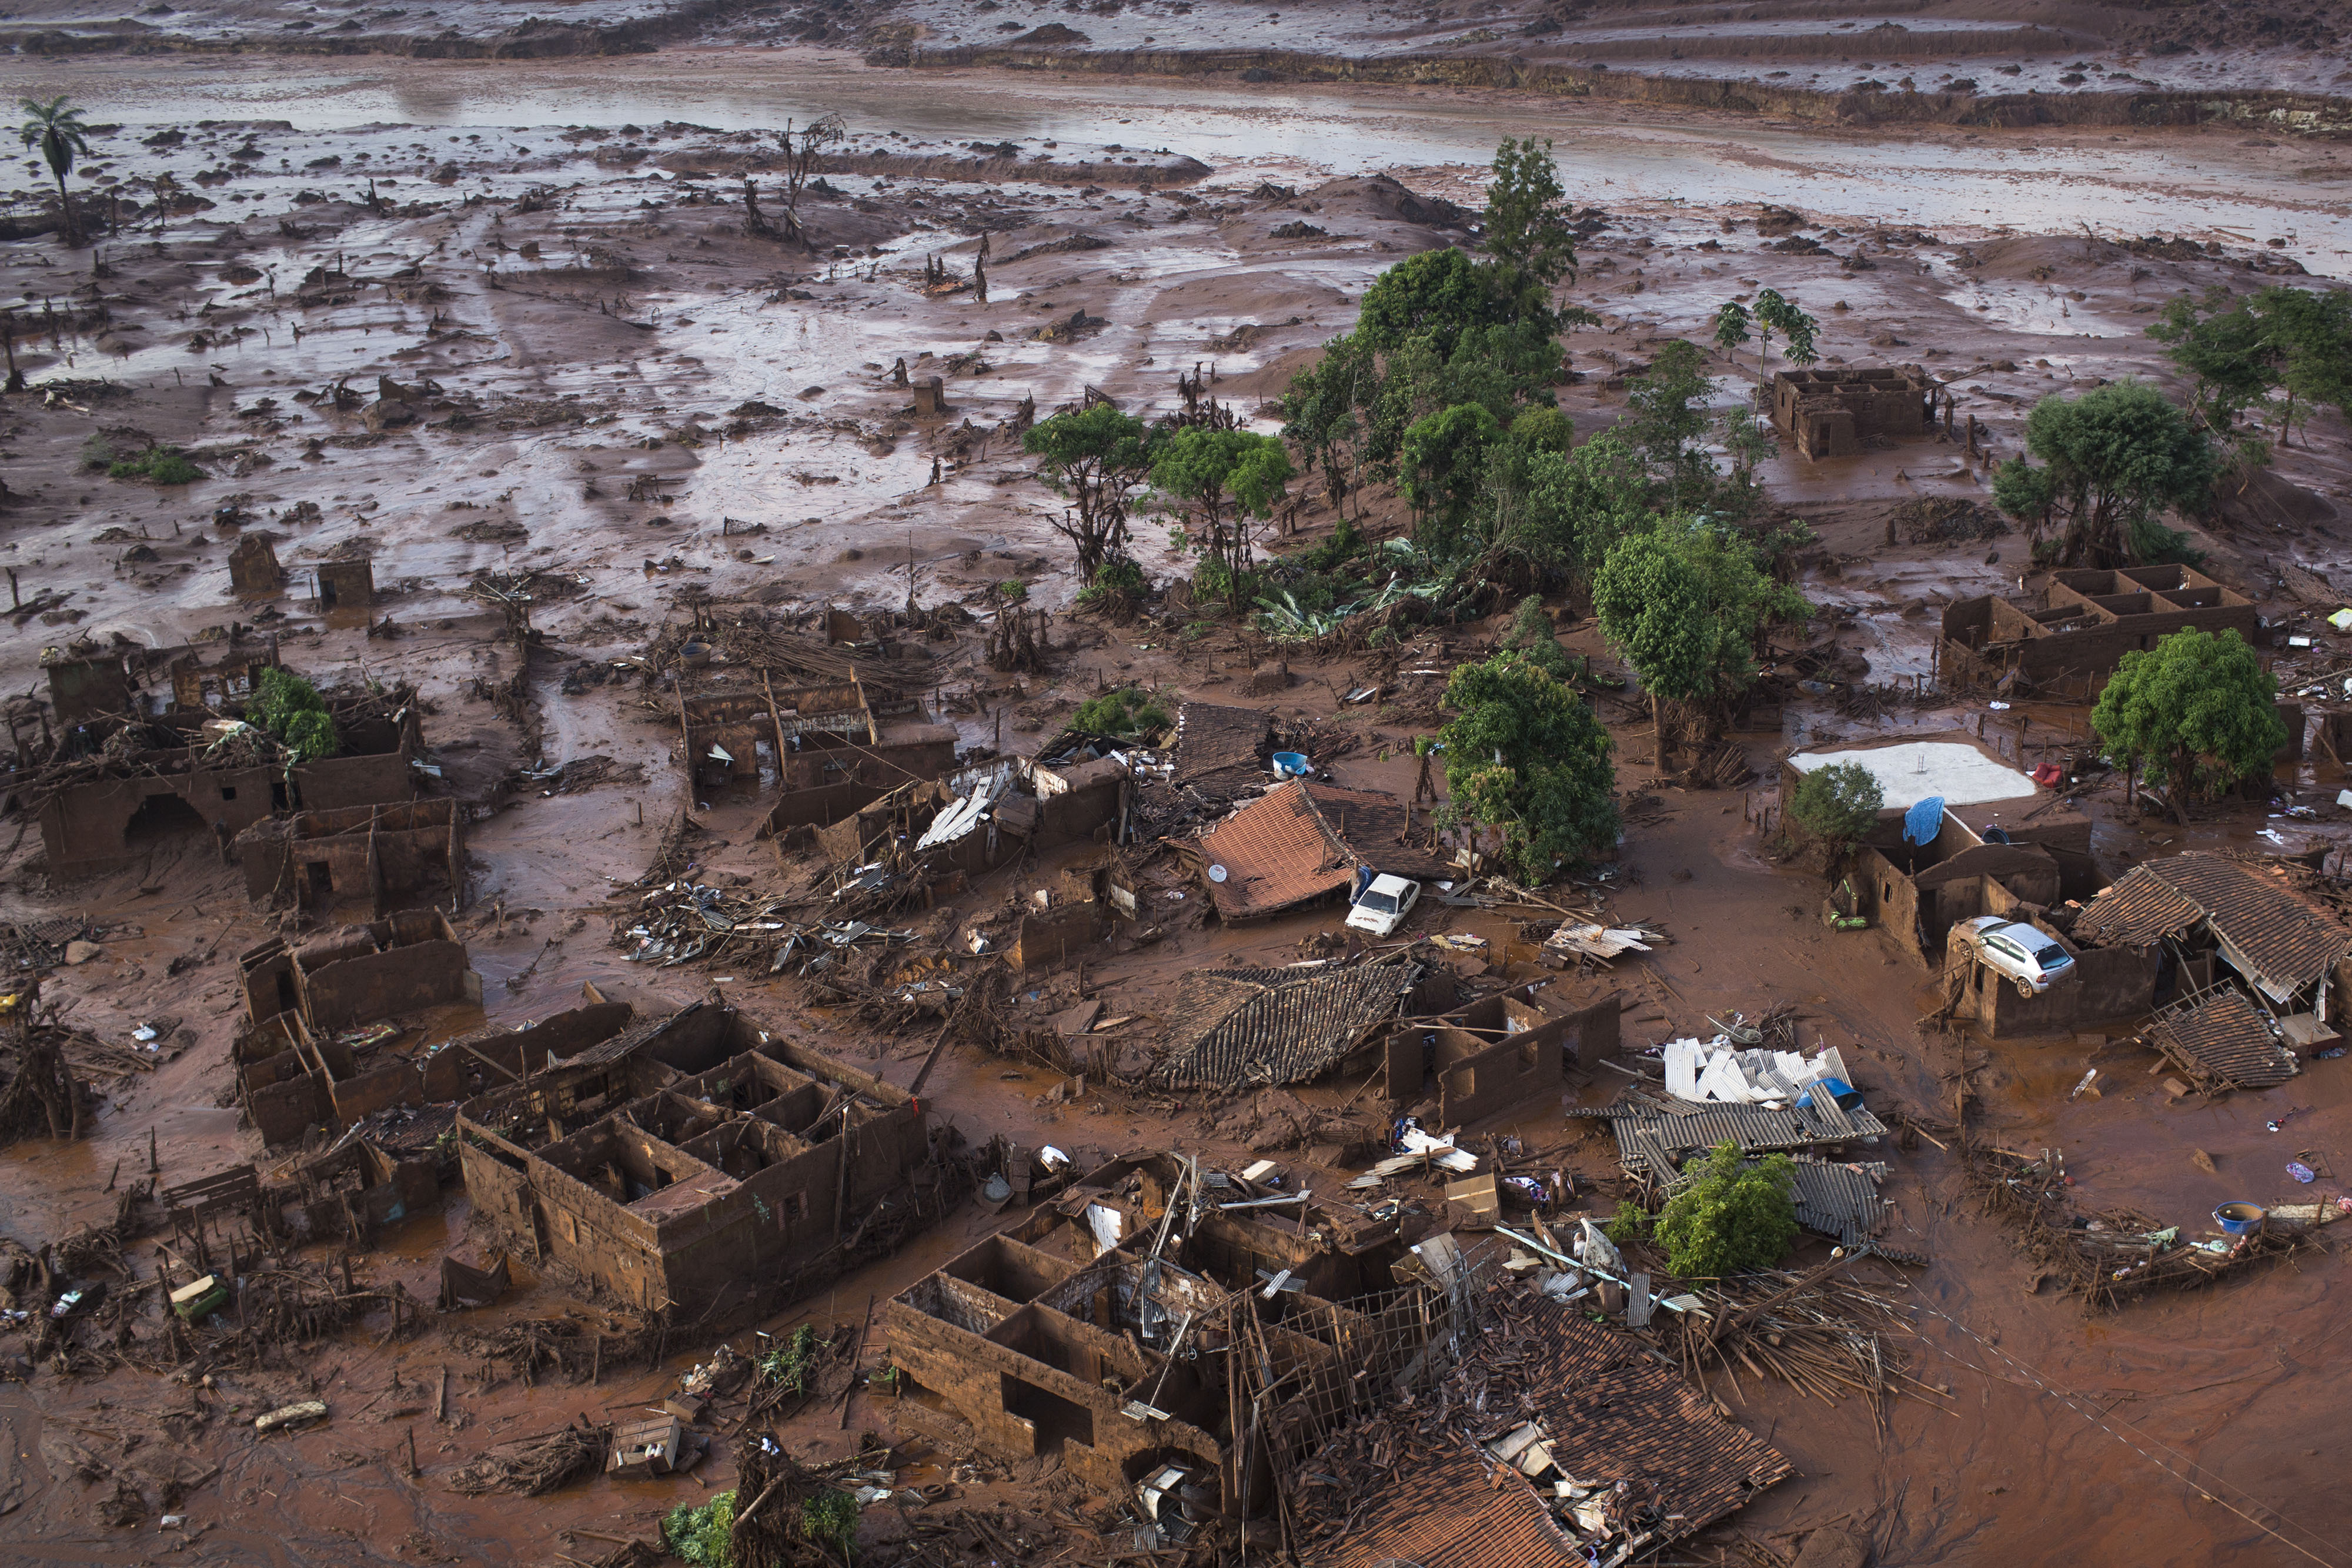 Homes lay in ruins after two dams burst, flooding the small town of Bento Rodrigues in Minas Gerais state, Brazil in 2015.